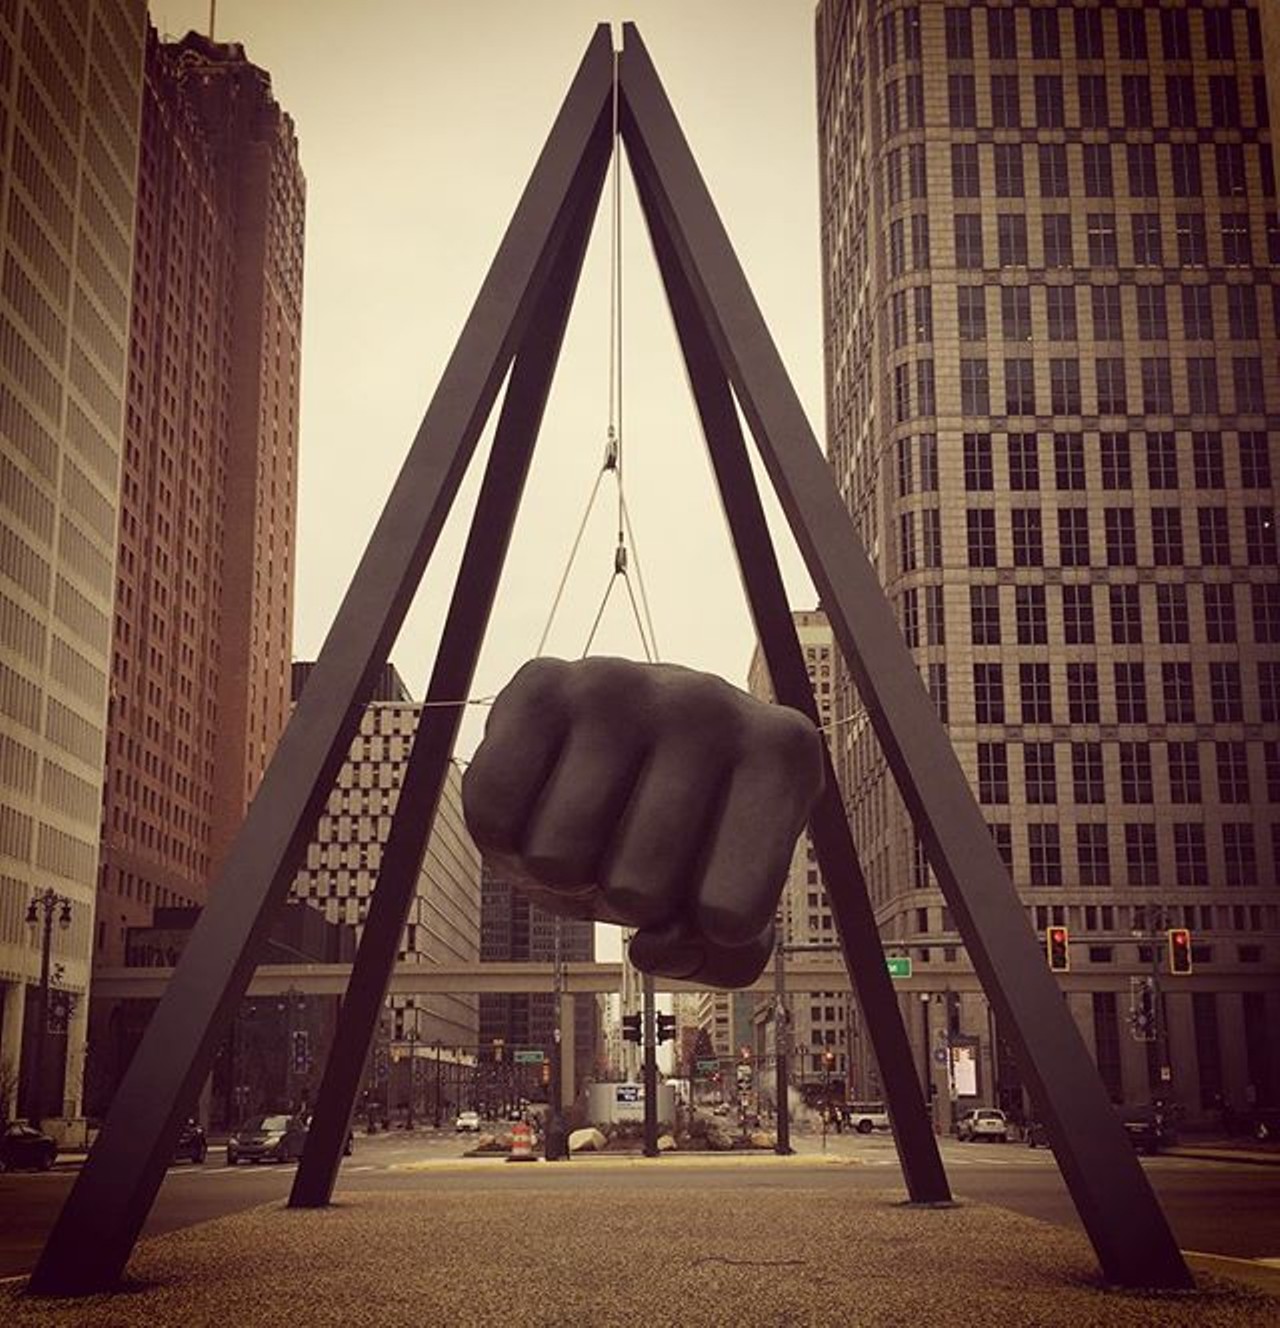 Monument to Joe Louis
Close to our &#147;Jolly Green Giant,&#148; is another iconic Detroit monument - The Monument to Joe Louis, better known as &#147;The Fist.&#148; Literally a giant fist hanging in front of Hart Plaza, it provides an interesting yet photo worthy place to tongue wrestle; E. Jefferson Ave. (Photo courtesy of instagram user sidecar_tony)